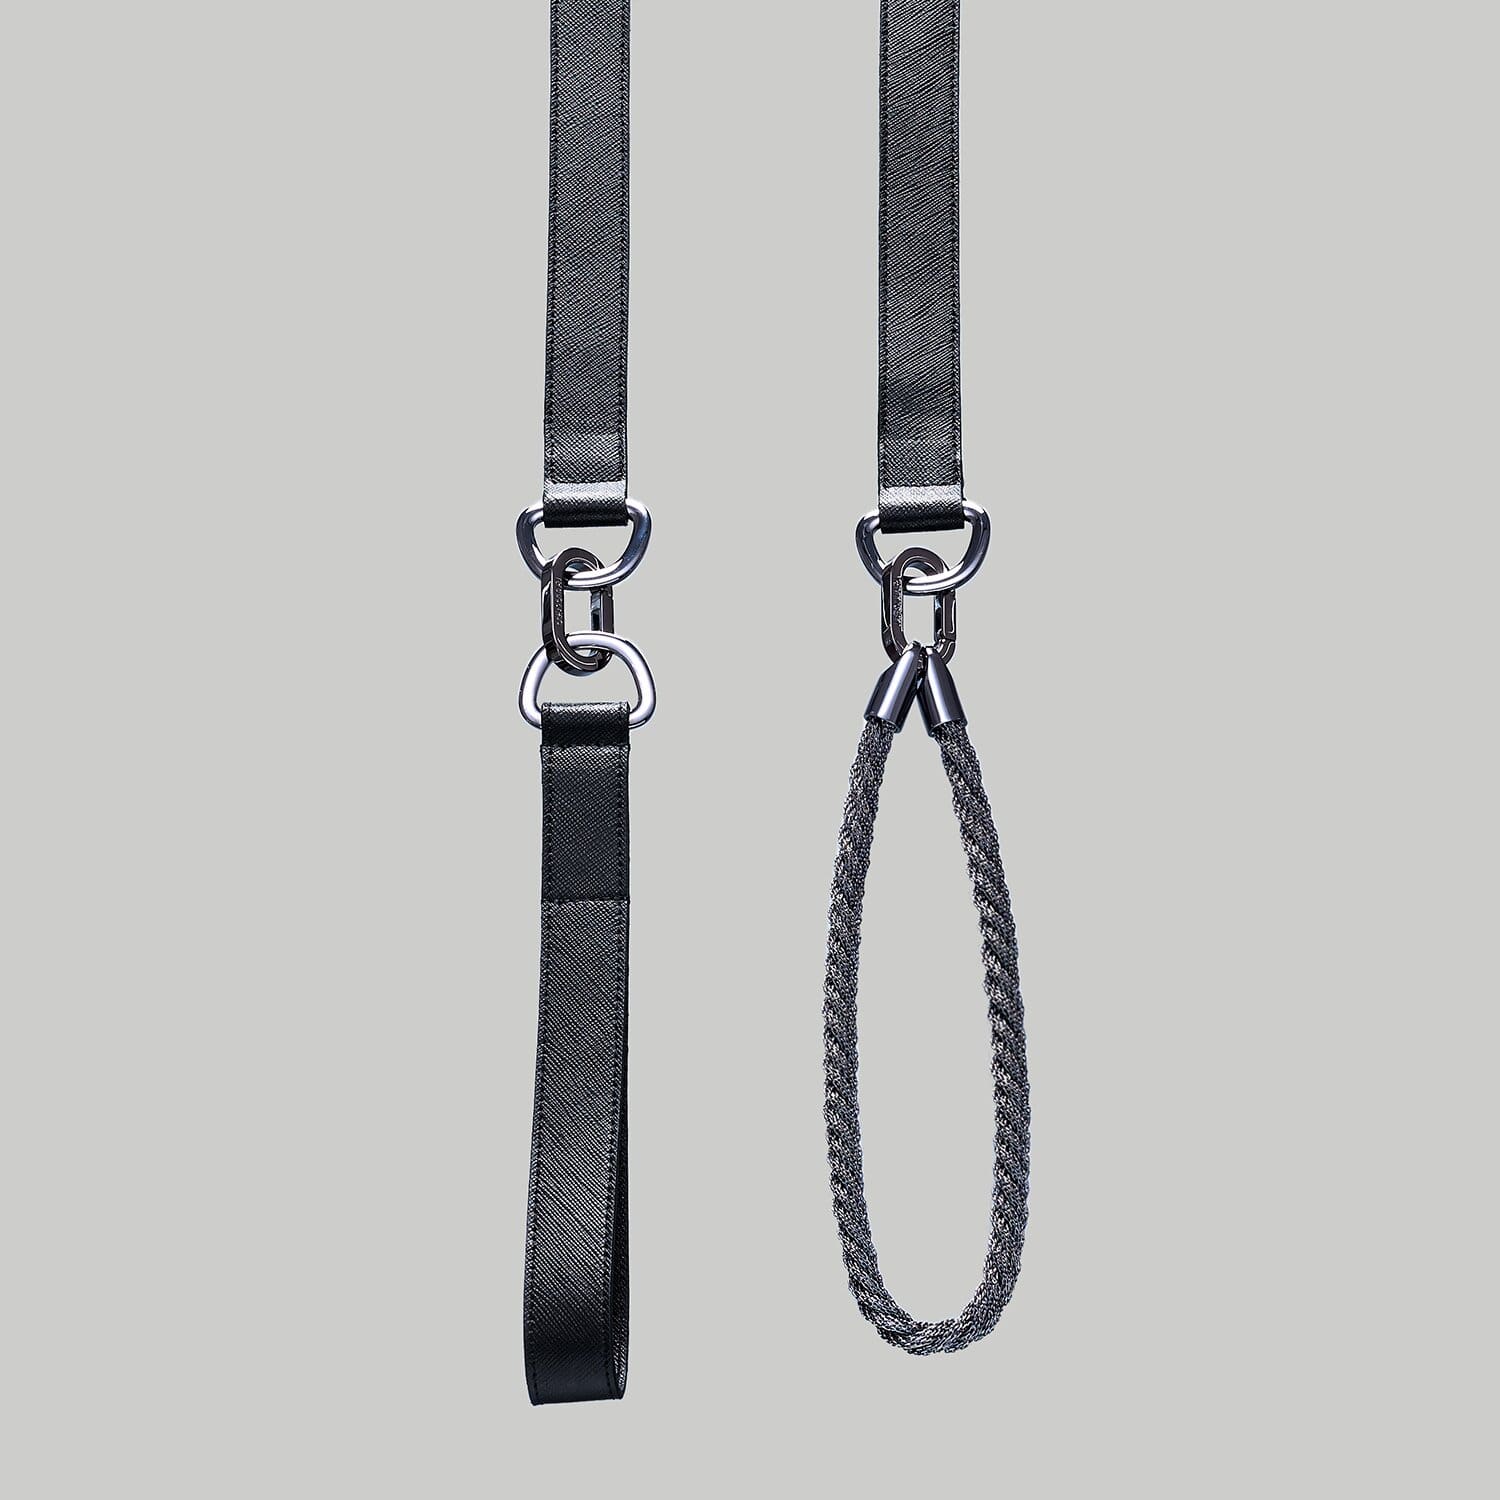 Dog leash in black Saffiano leather with Ruthenium